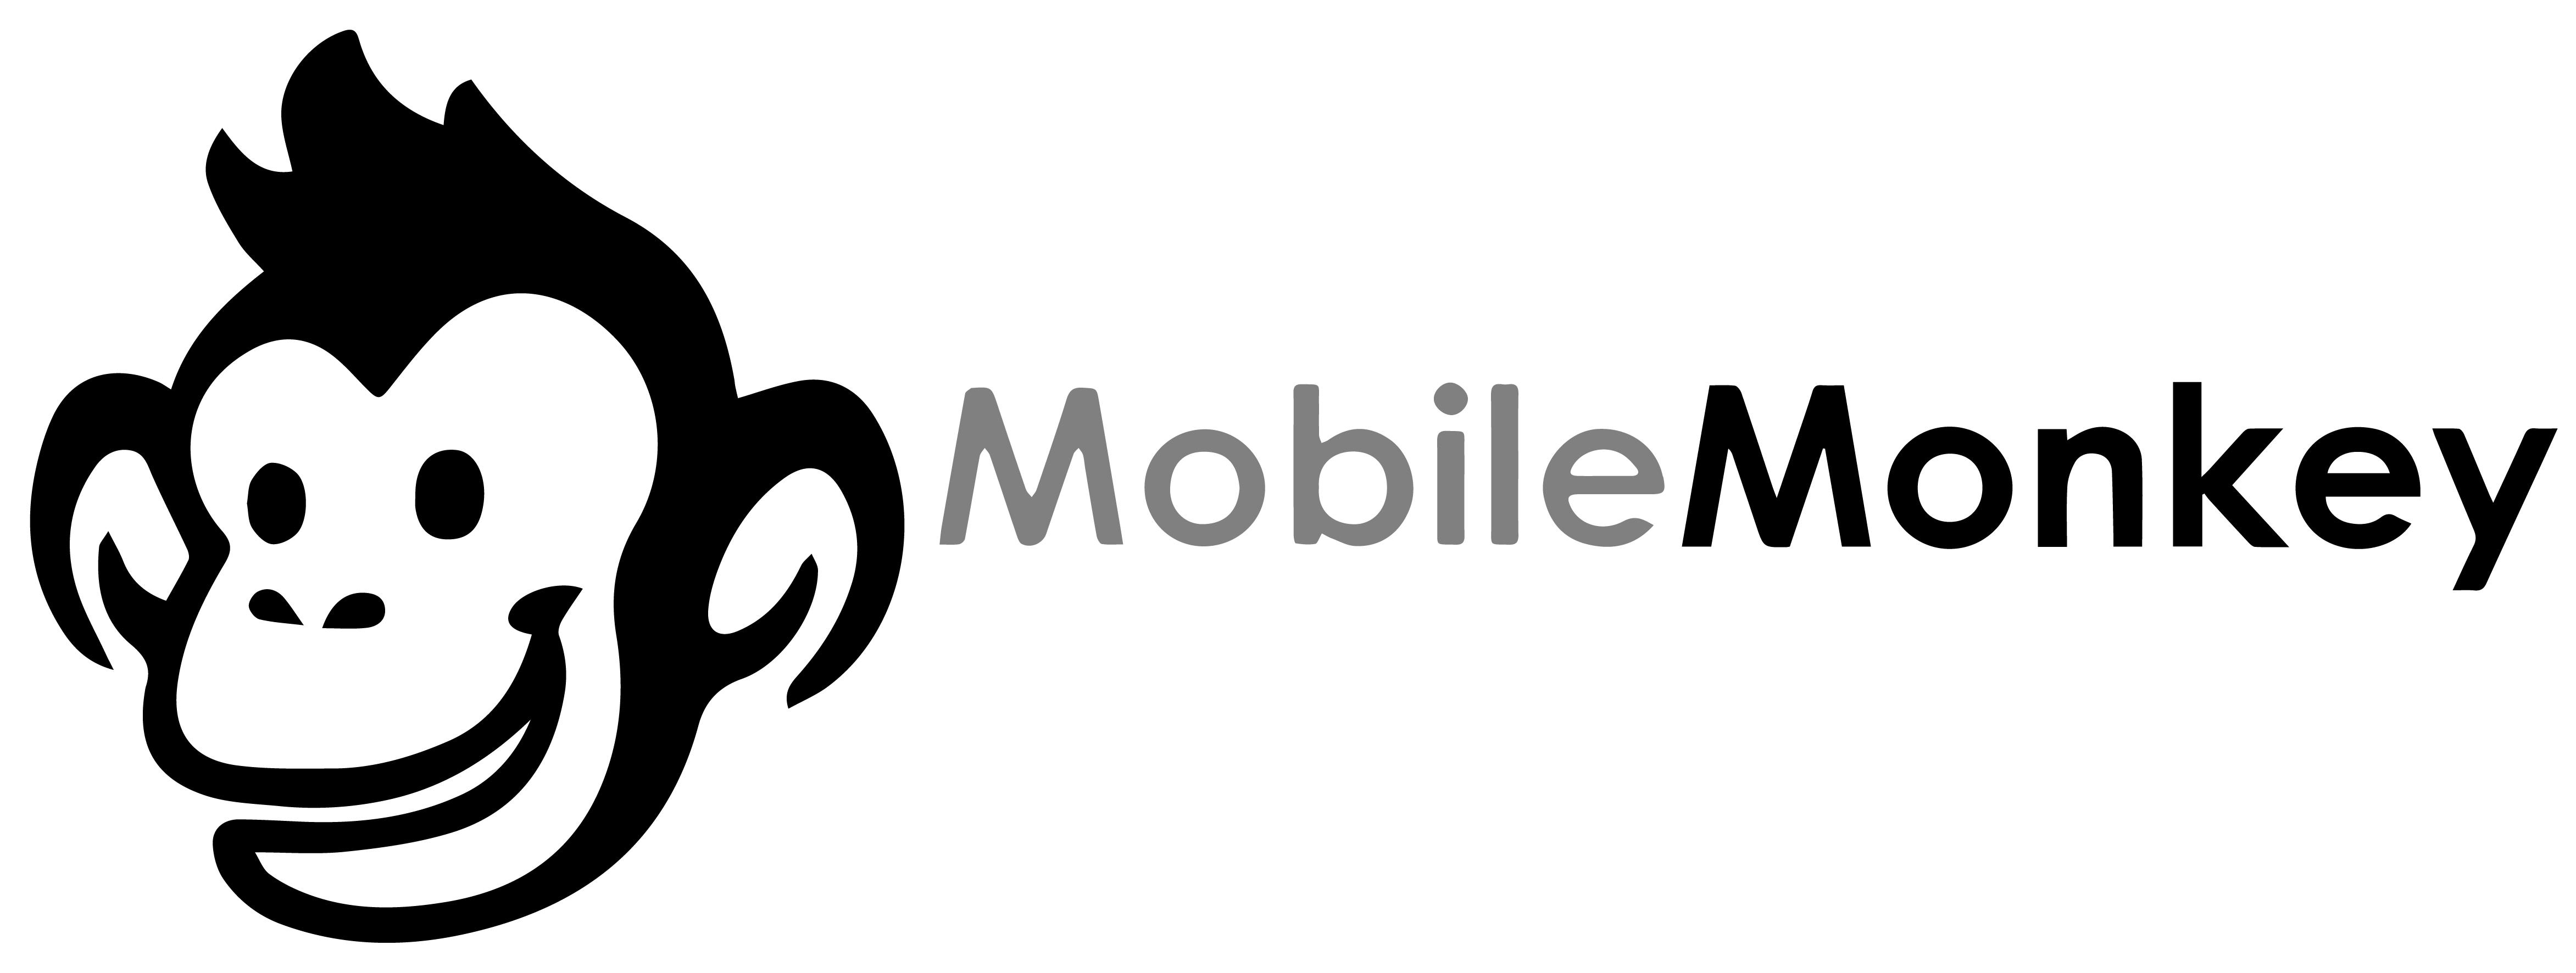 What is Mobile Monkey?, How does Mobile Monkey work?, Is Mobile Monkey legit?, What is Messenger Bot?, Mobile Monkey features, Messenger Bot features